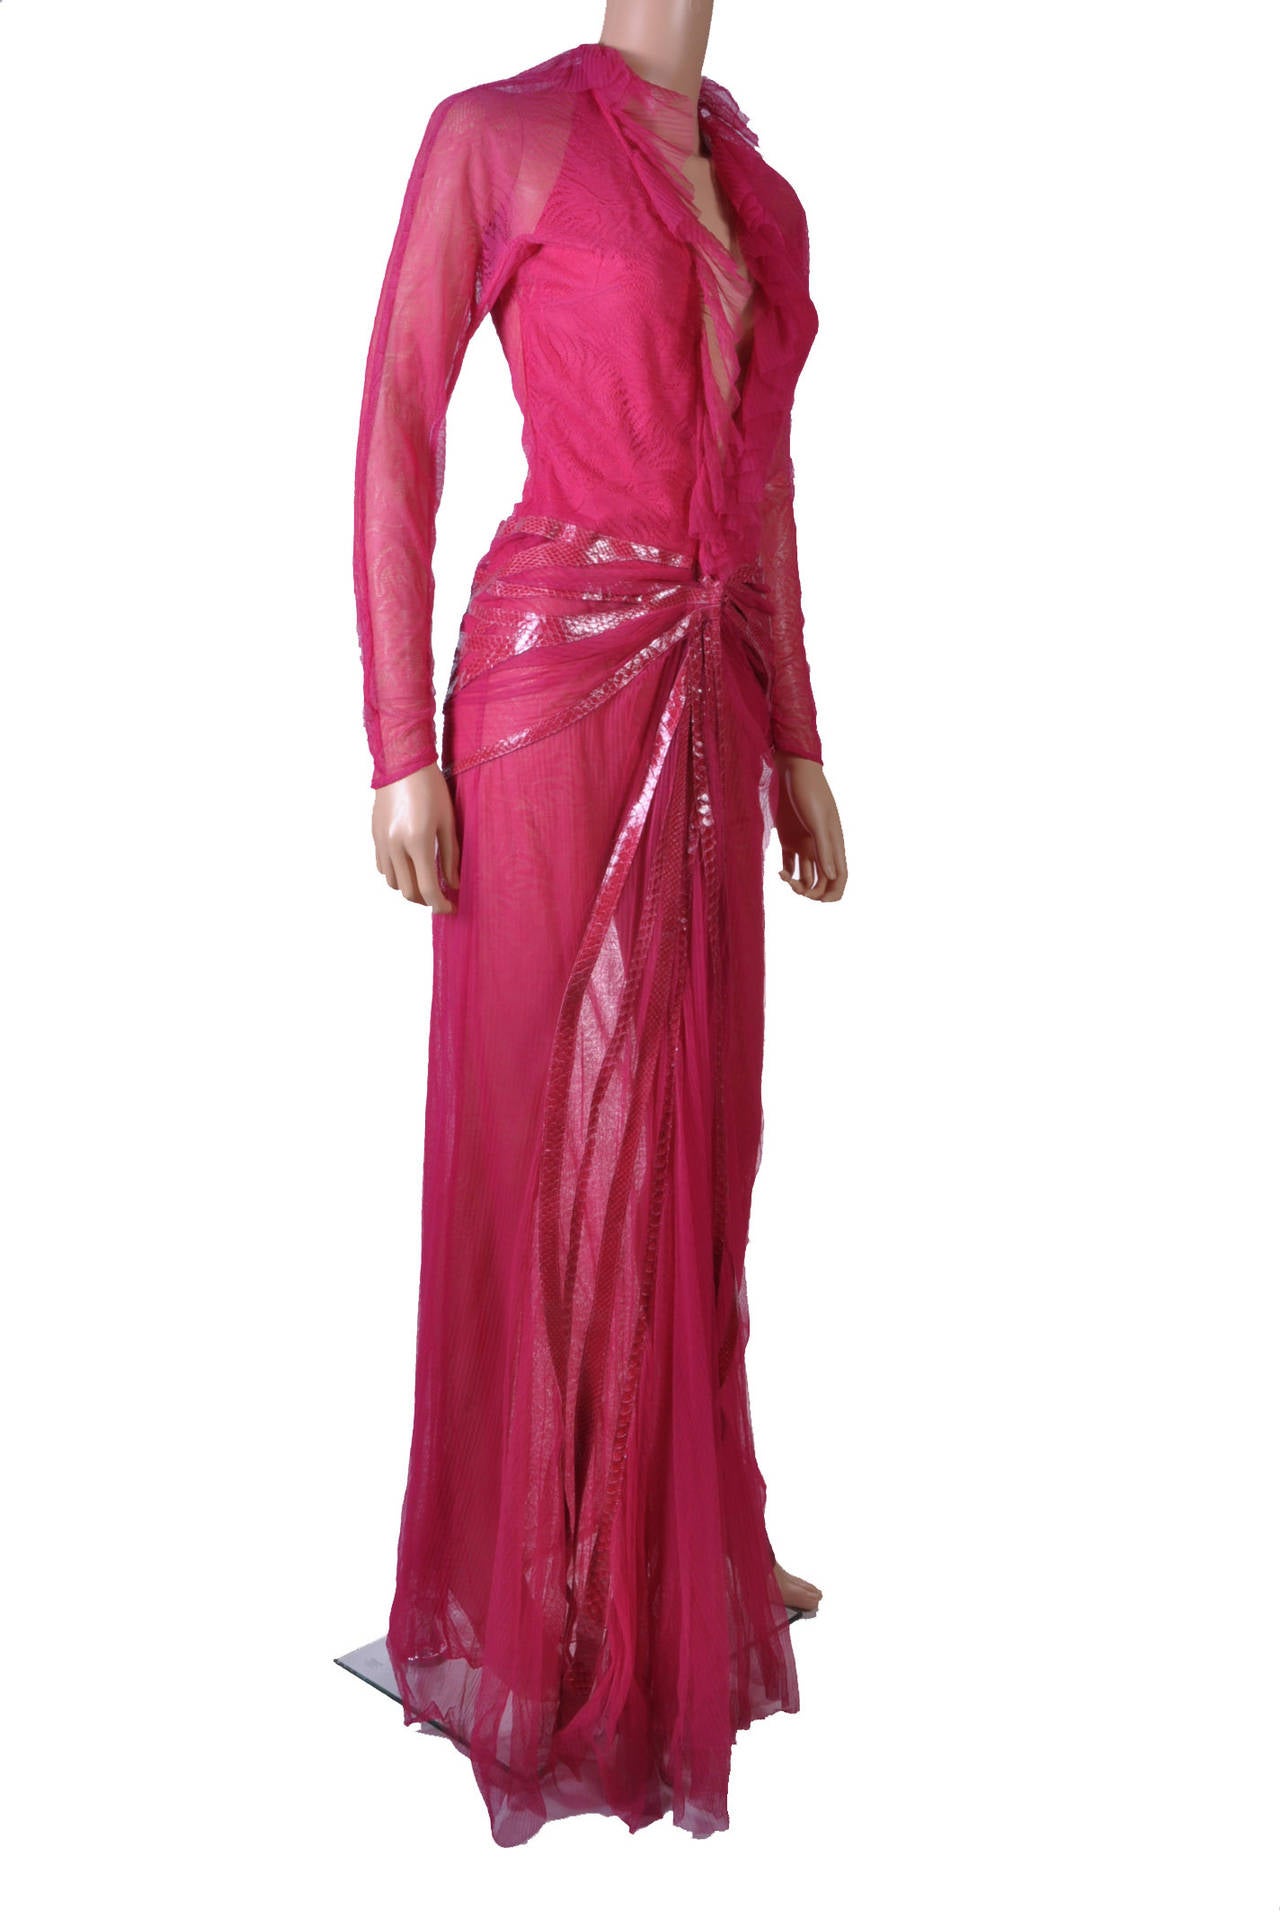 Versace 

Collectible Gown from Iconic 2000 Fall collection

Pink Lace Gown with Snakeskin detail

Versace is known for its floor-skimming gowns. 

Make an entrance at your next formal occasion with this sexy version of the house's iconic